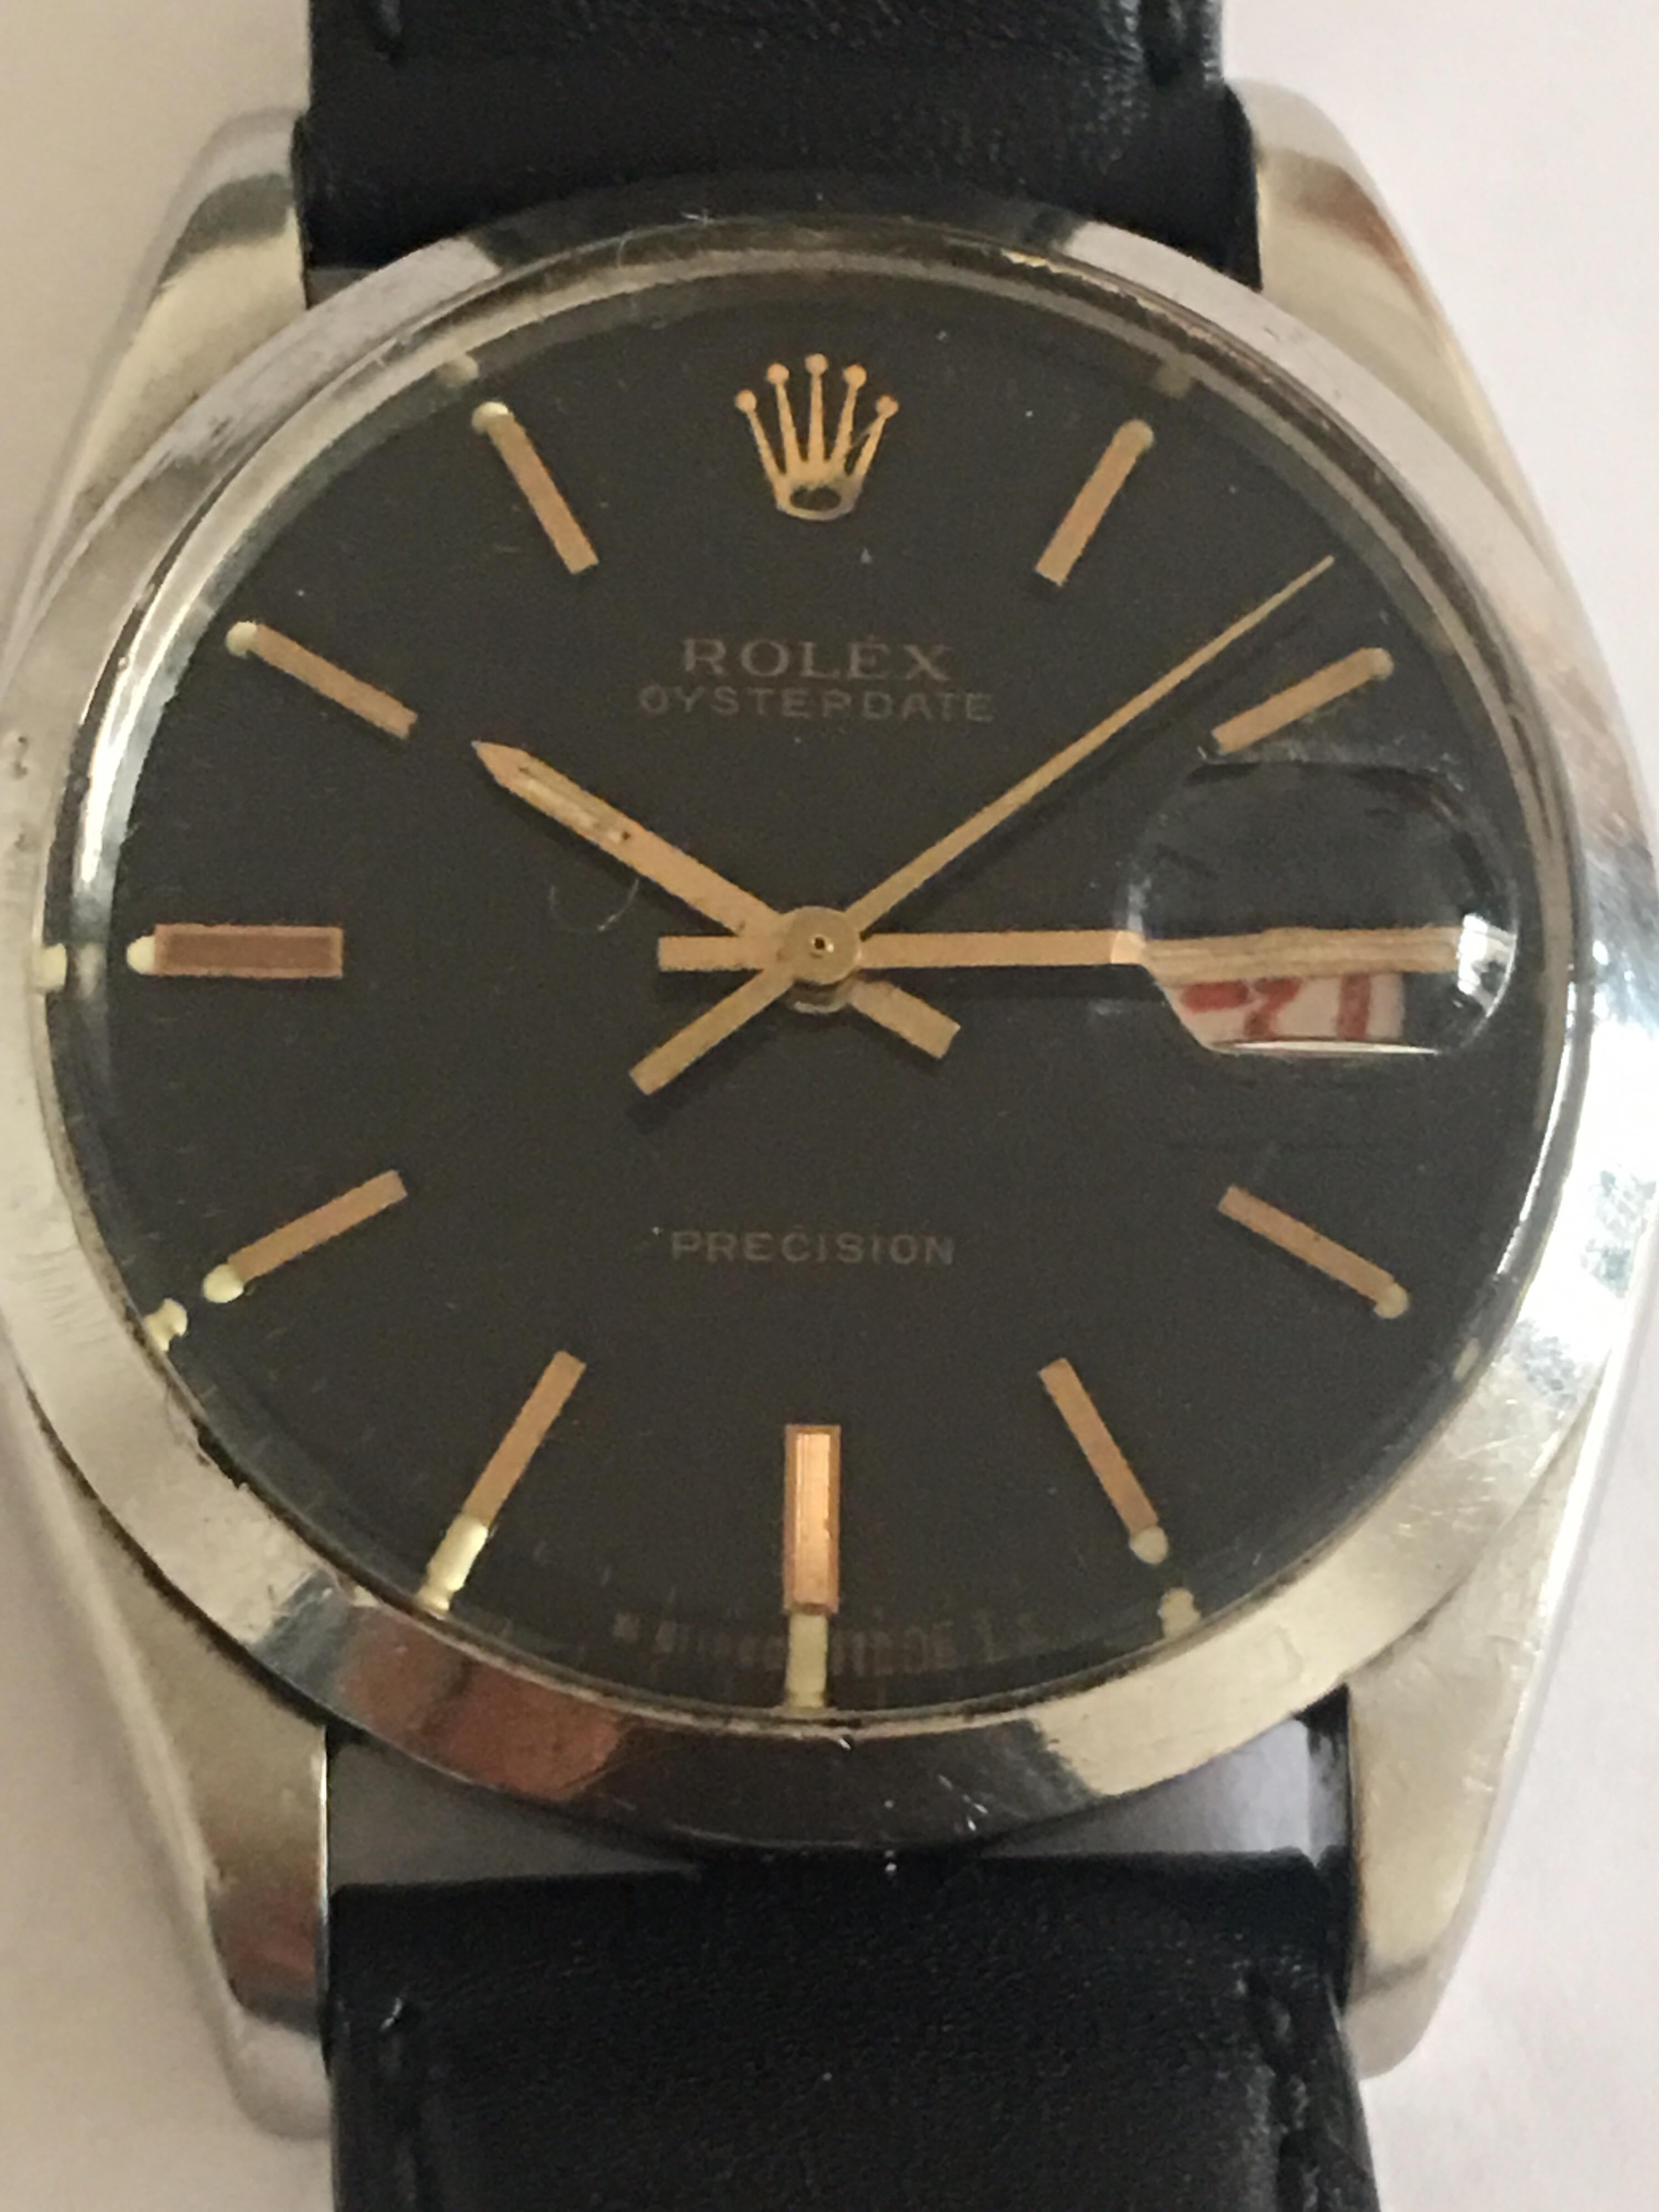 Vintage 1960s Rolex Oyster Date Precision 46561 13